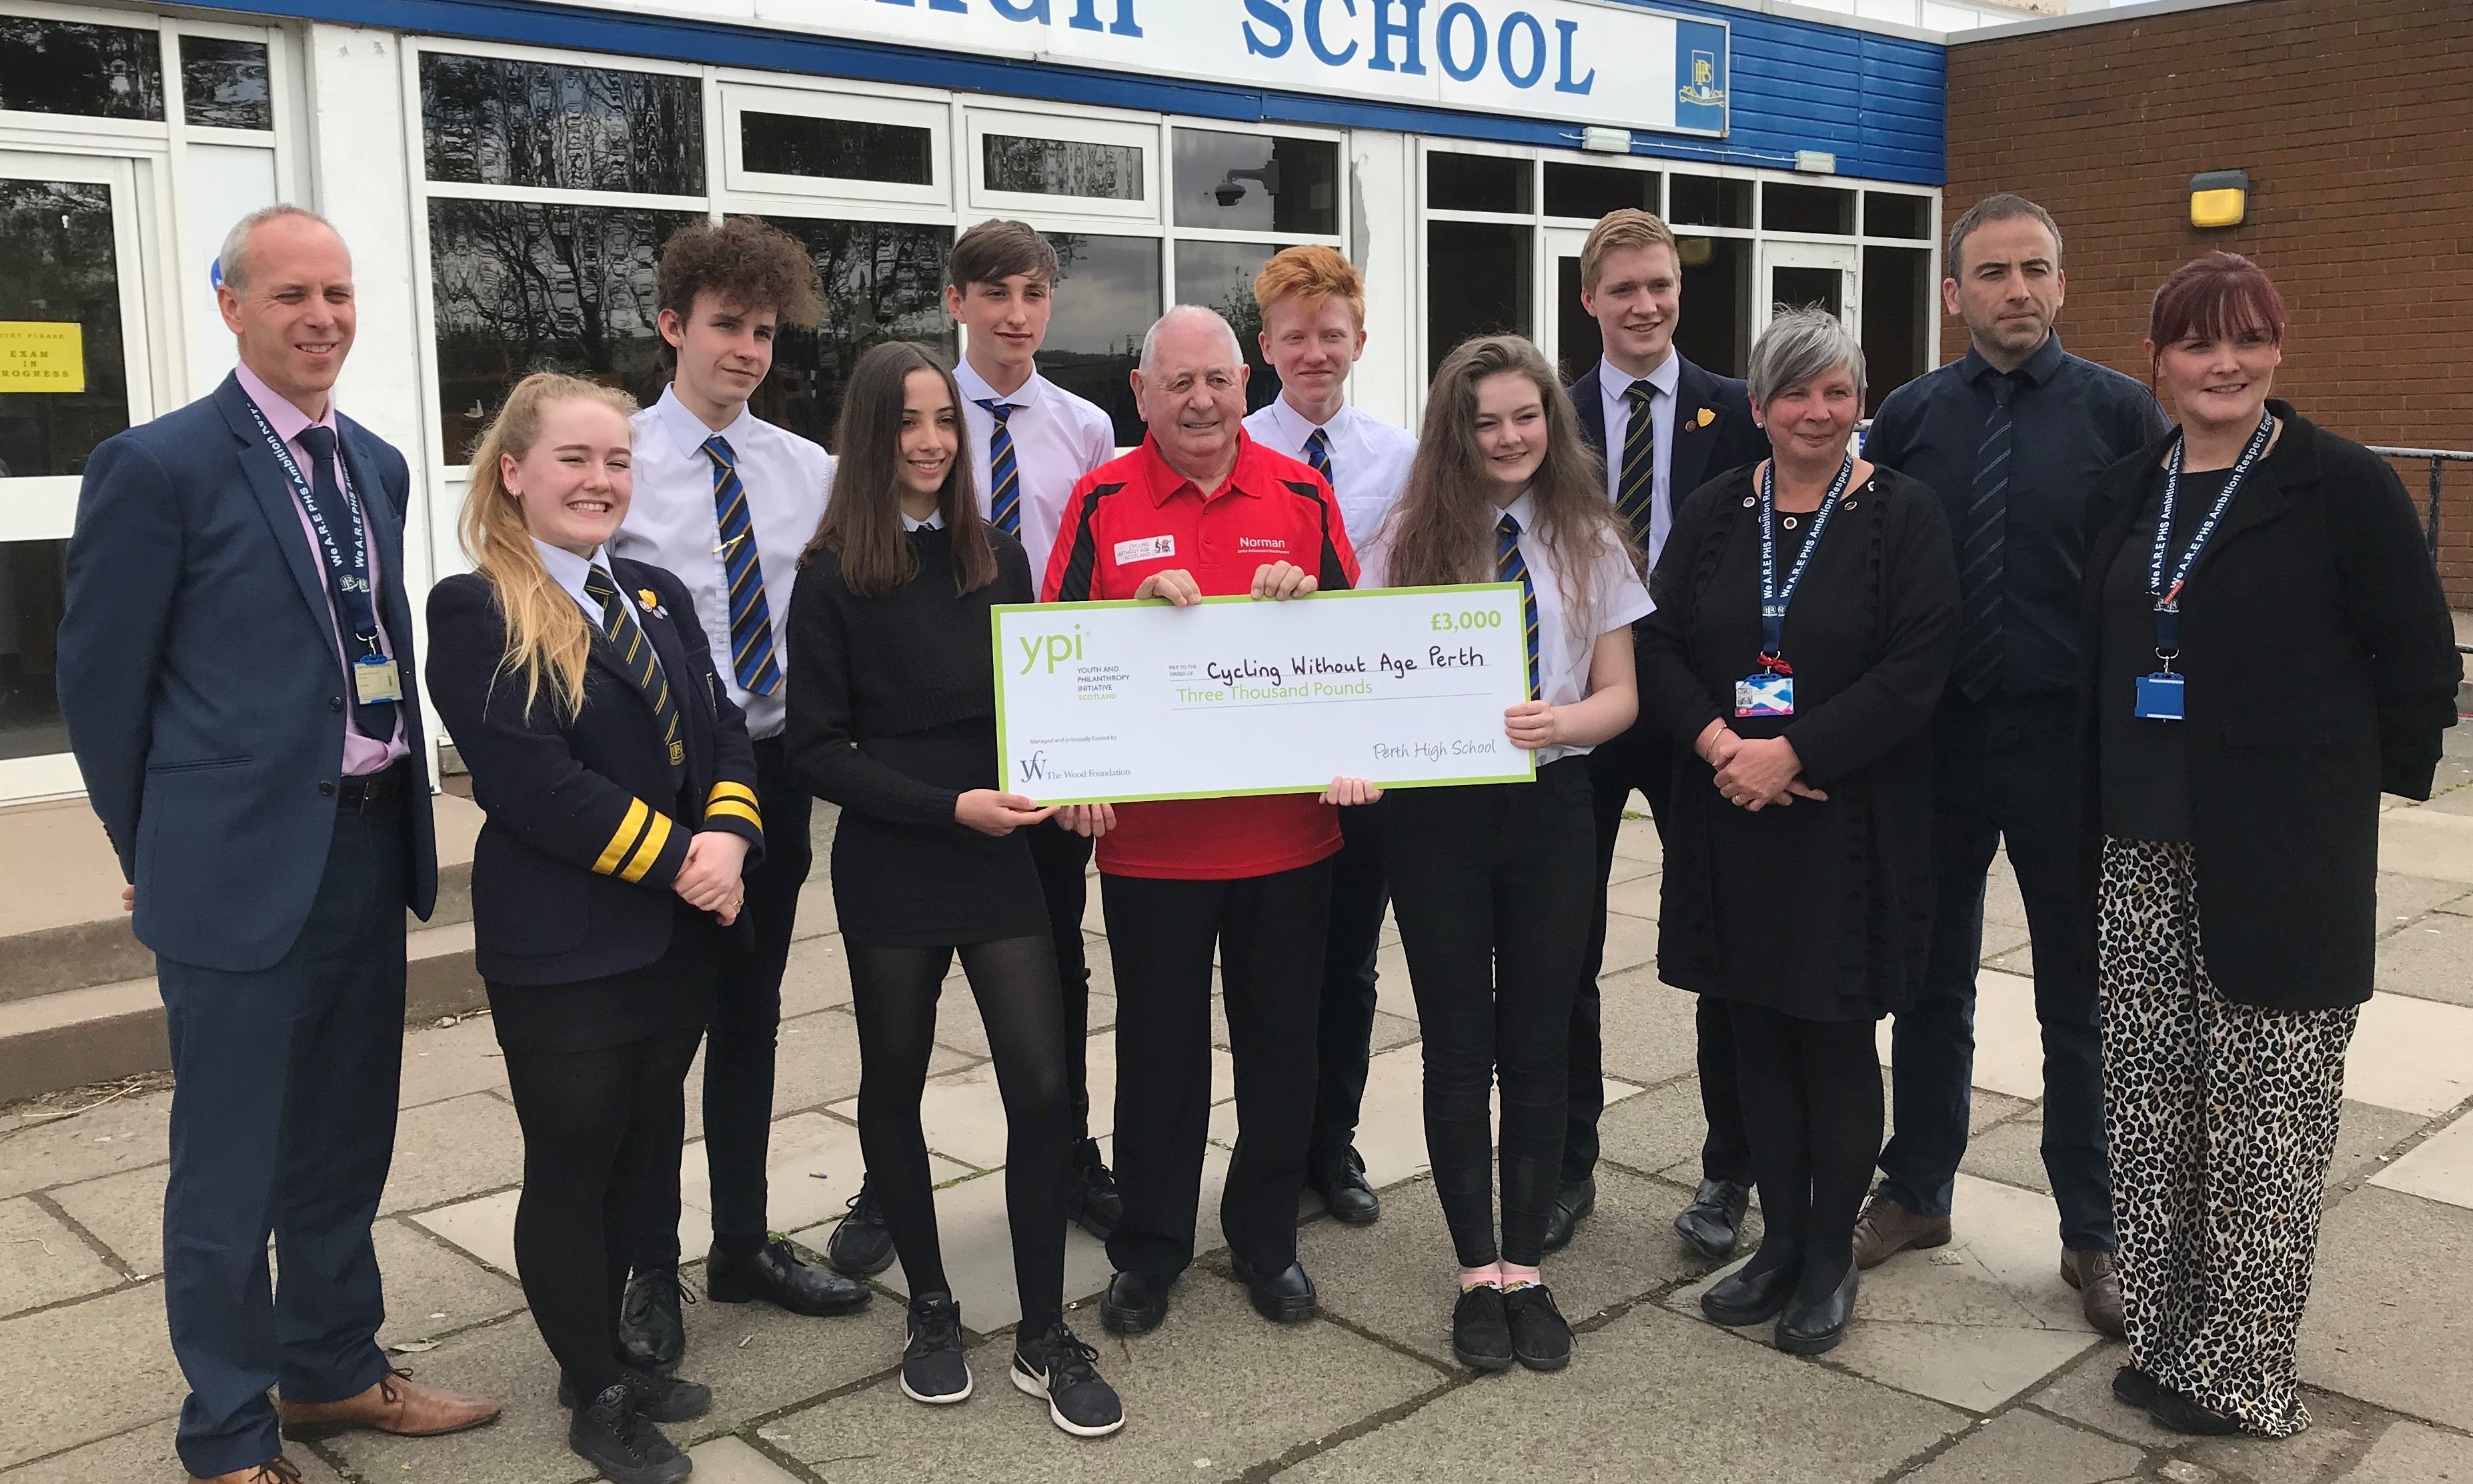 Perth High School students present their £3000 cheque.